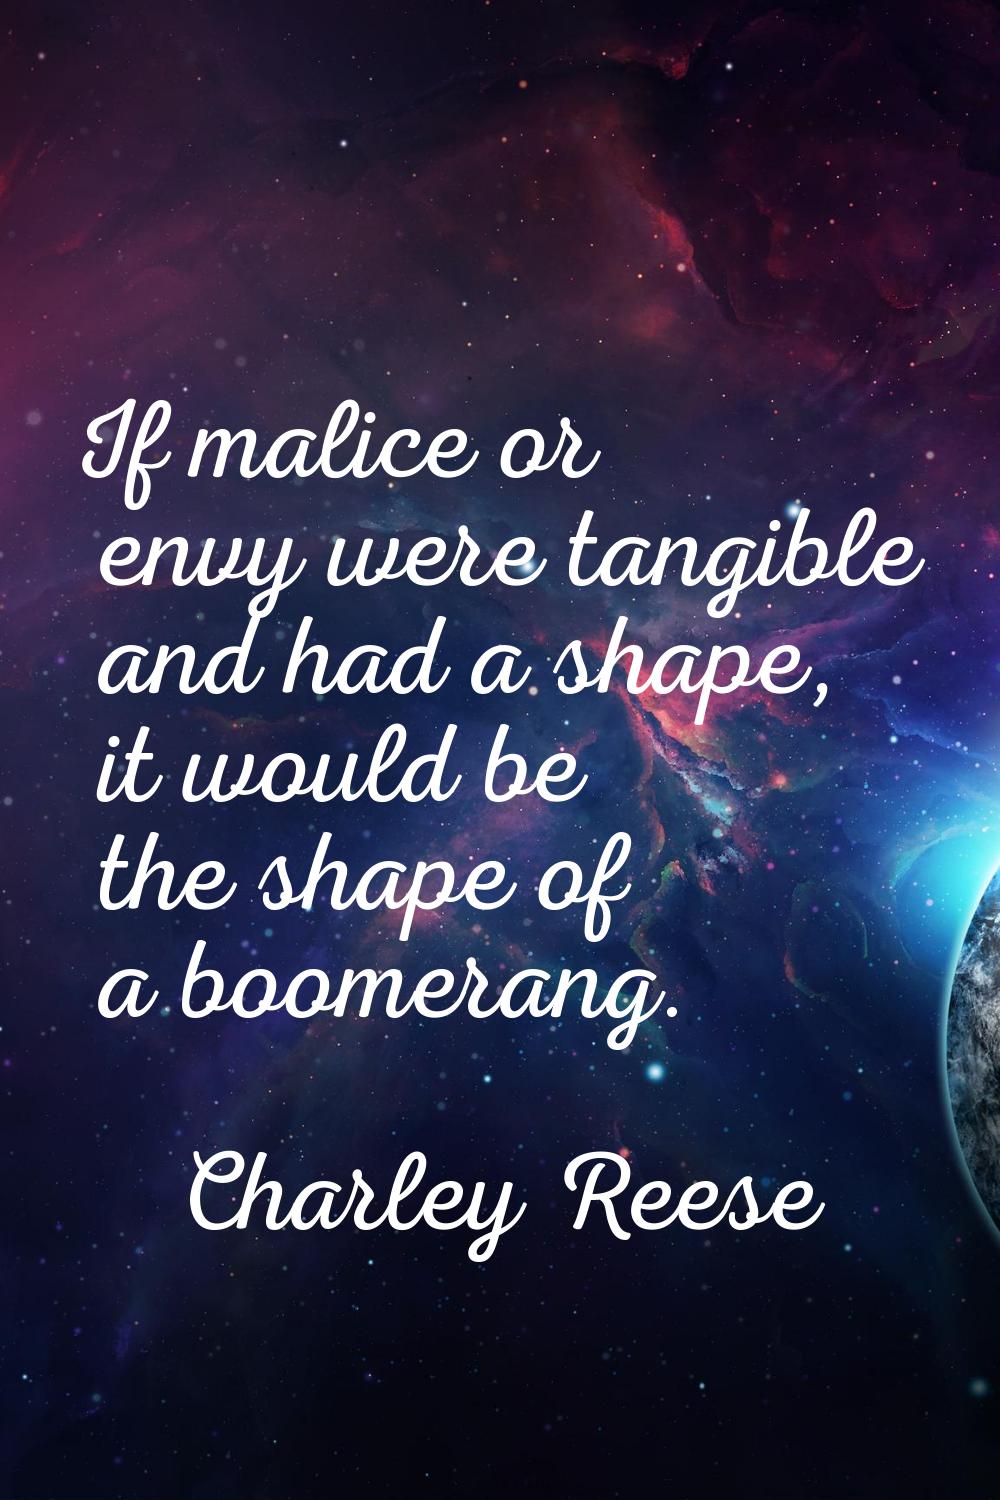 If malice or envy were tangible and had a shape, it would be the shape of a boomerang.